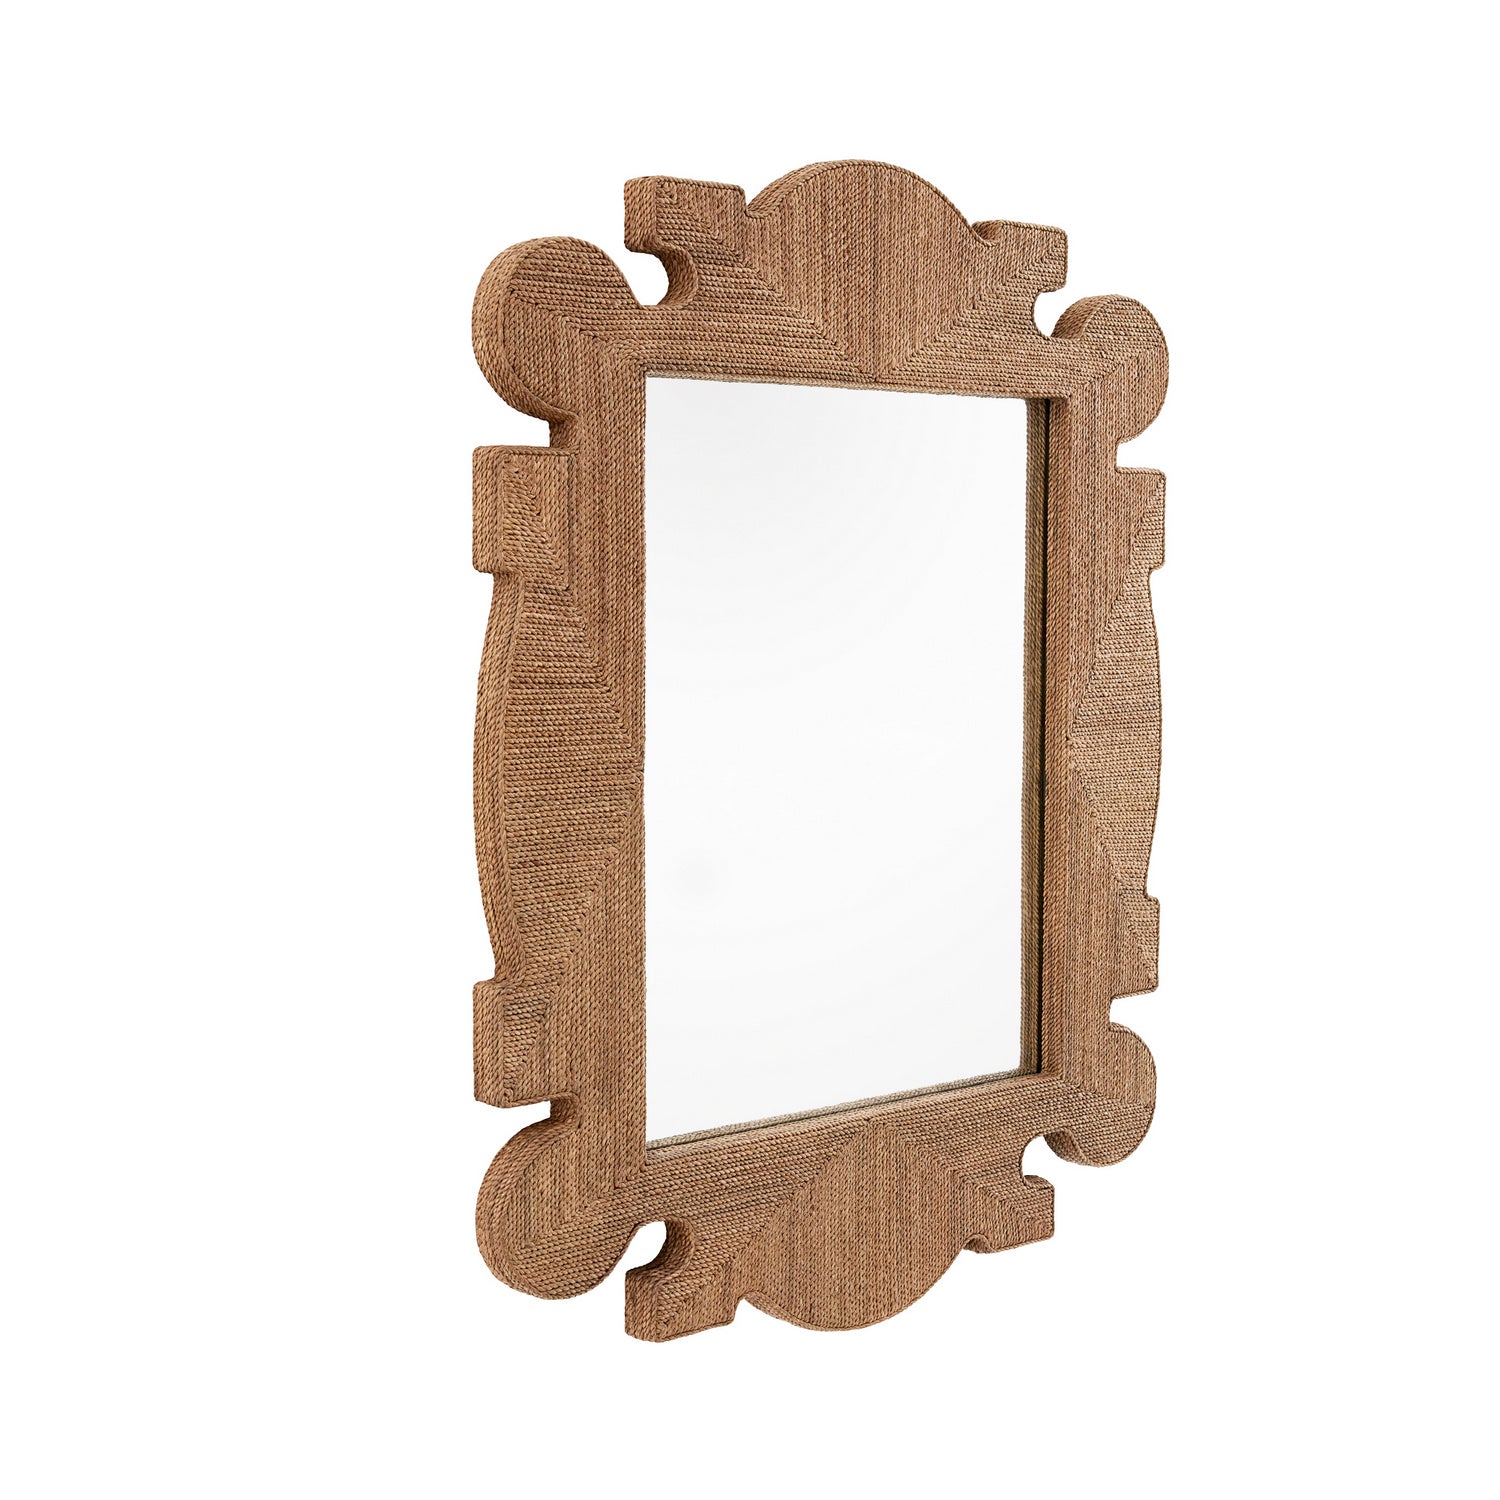 Mirror from the Mowgli collection in Tobacco Stained finish